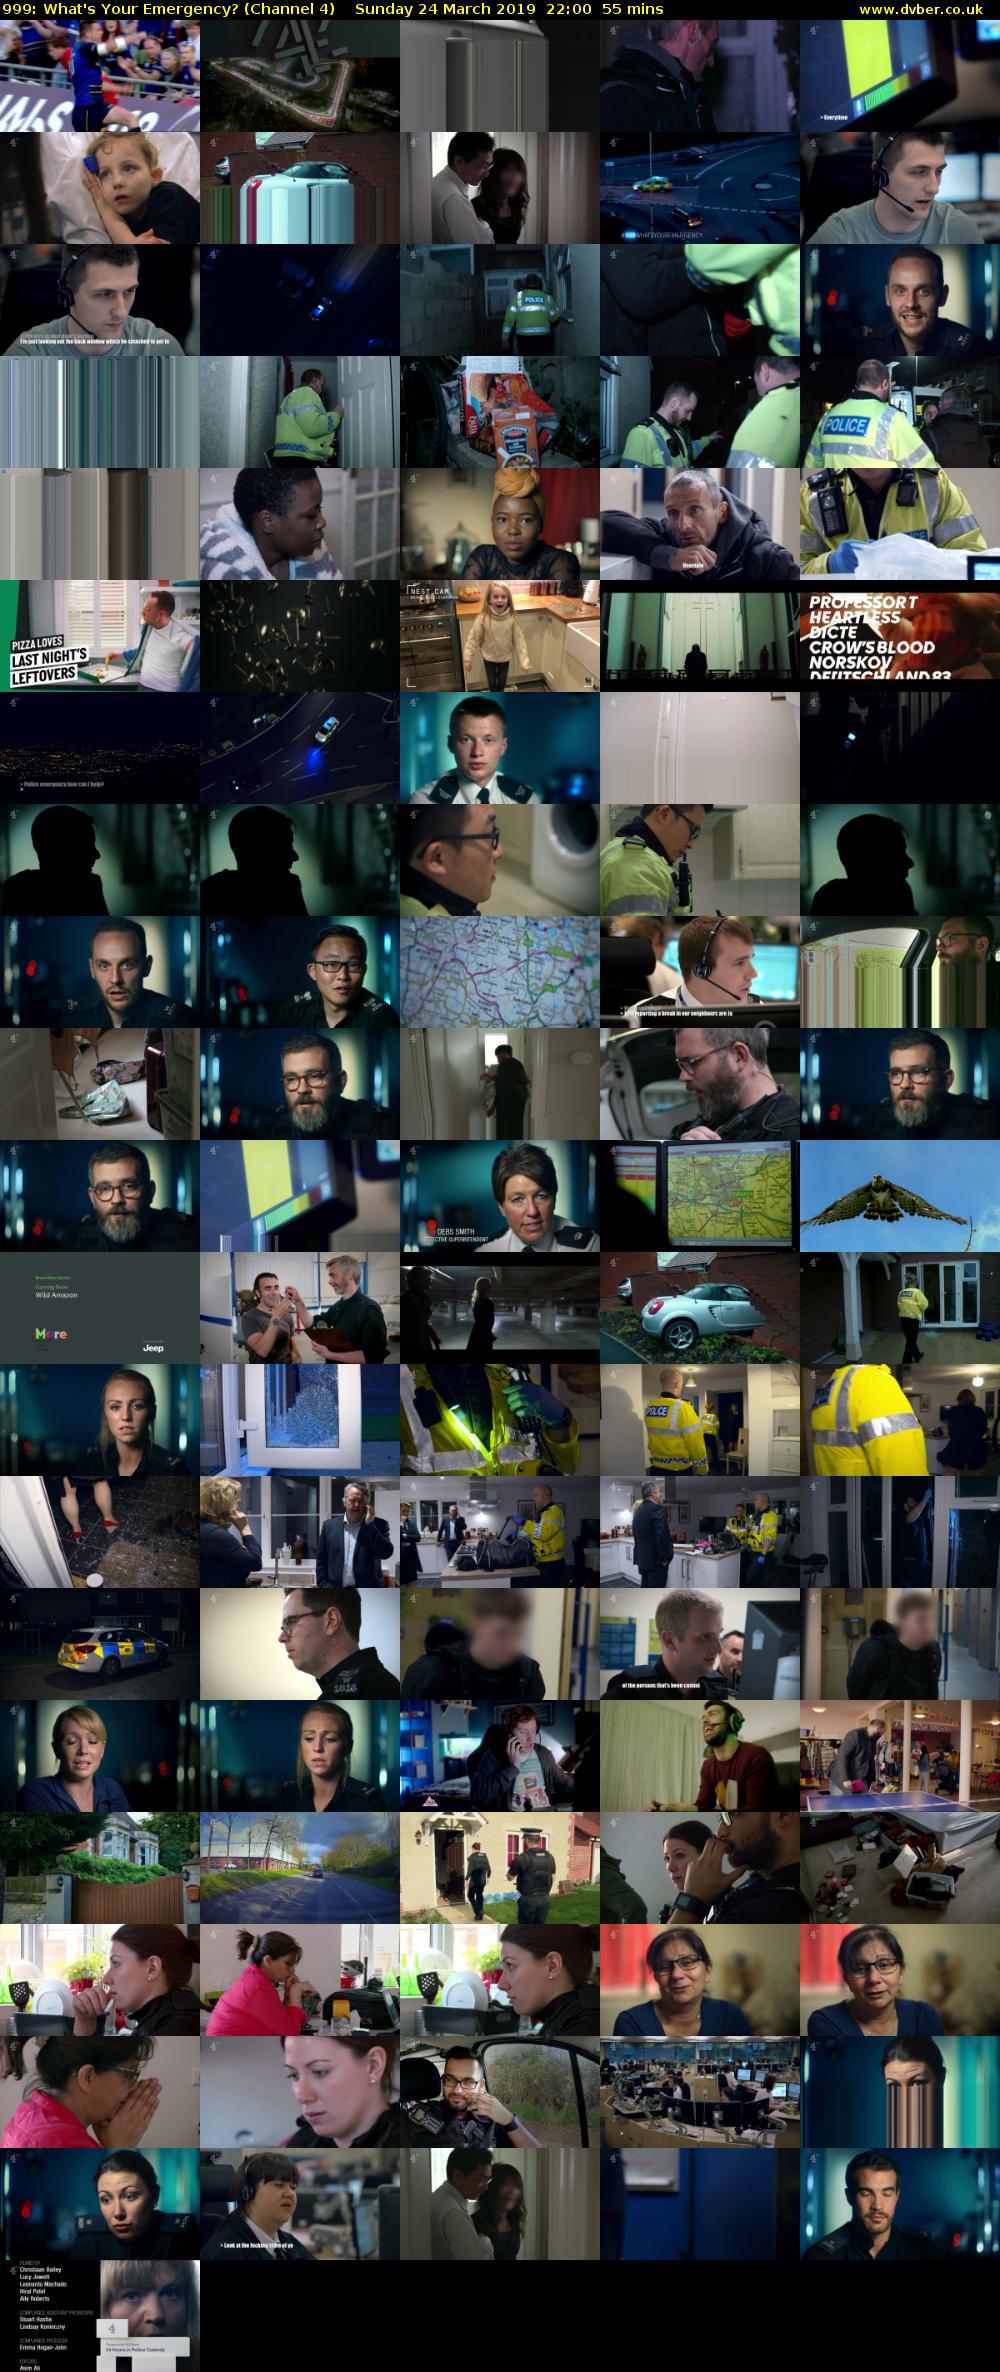 999: What's Your Emergency? (Channel 4) Sunday 24 March 2019 22:00 - 22:55